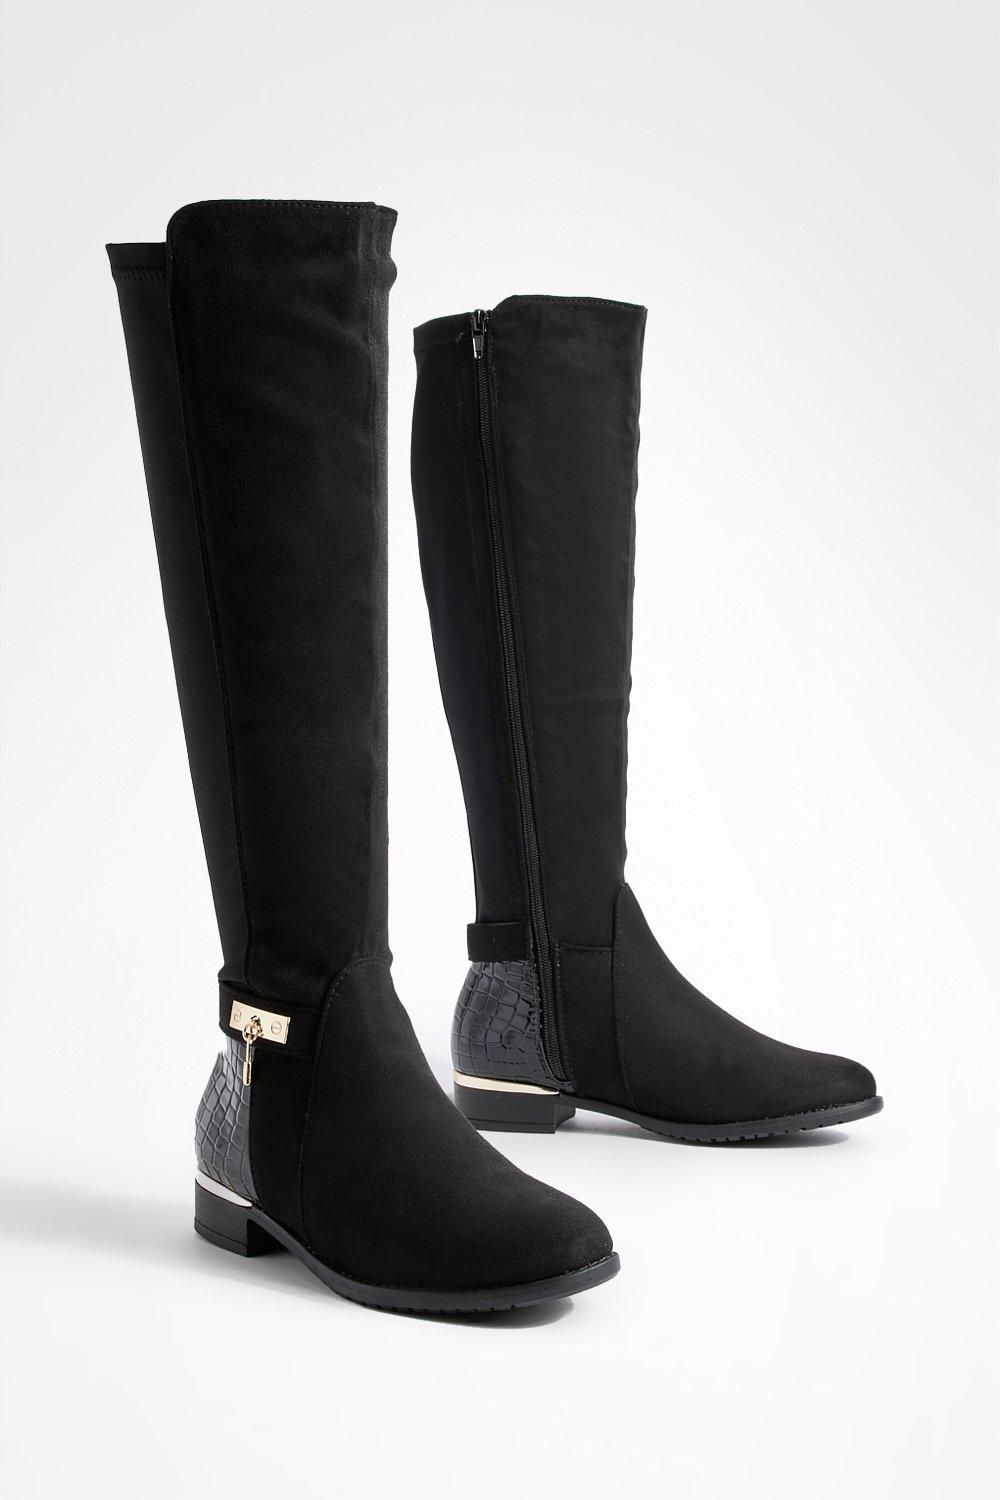 womens knee high boots sale